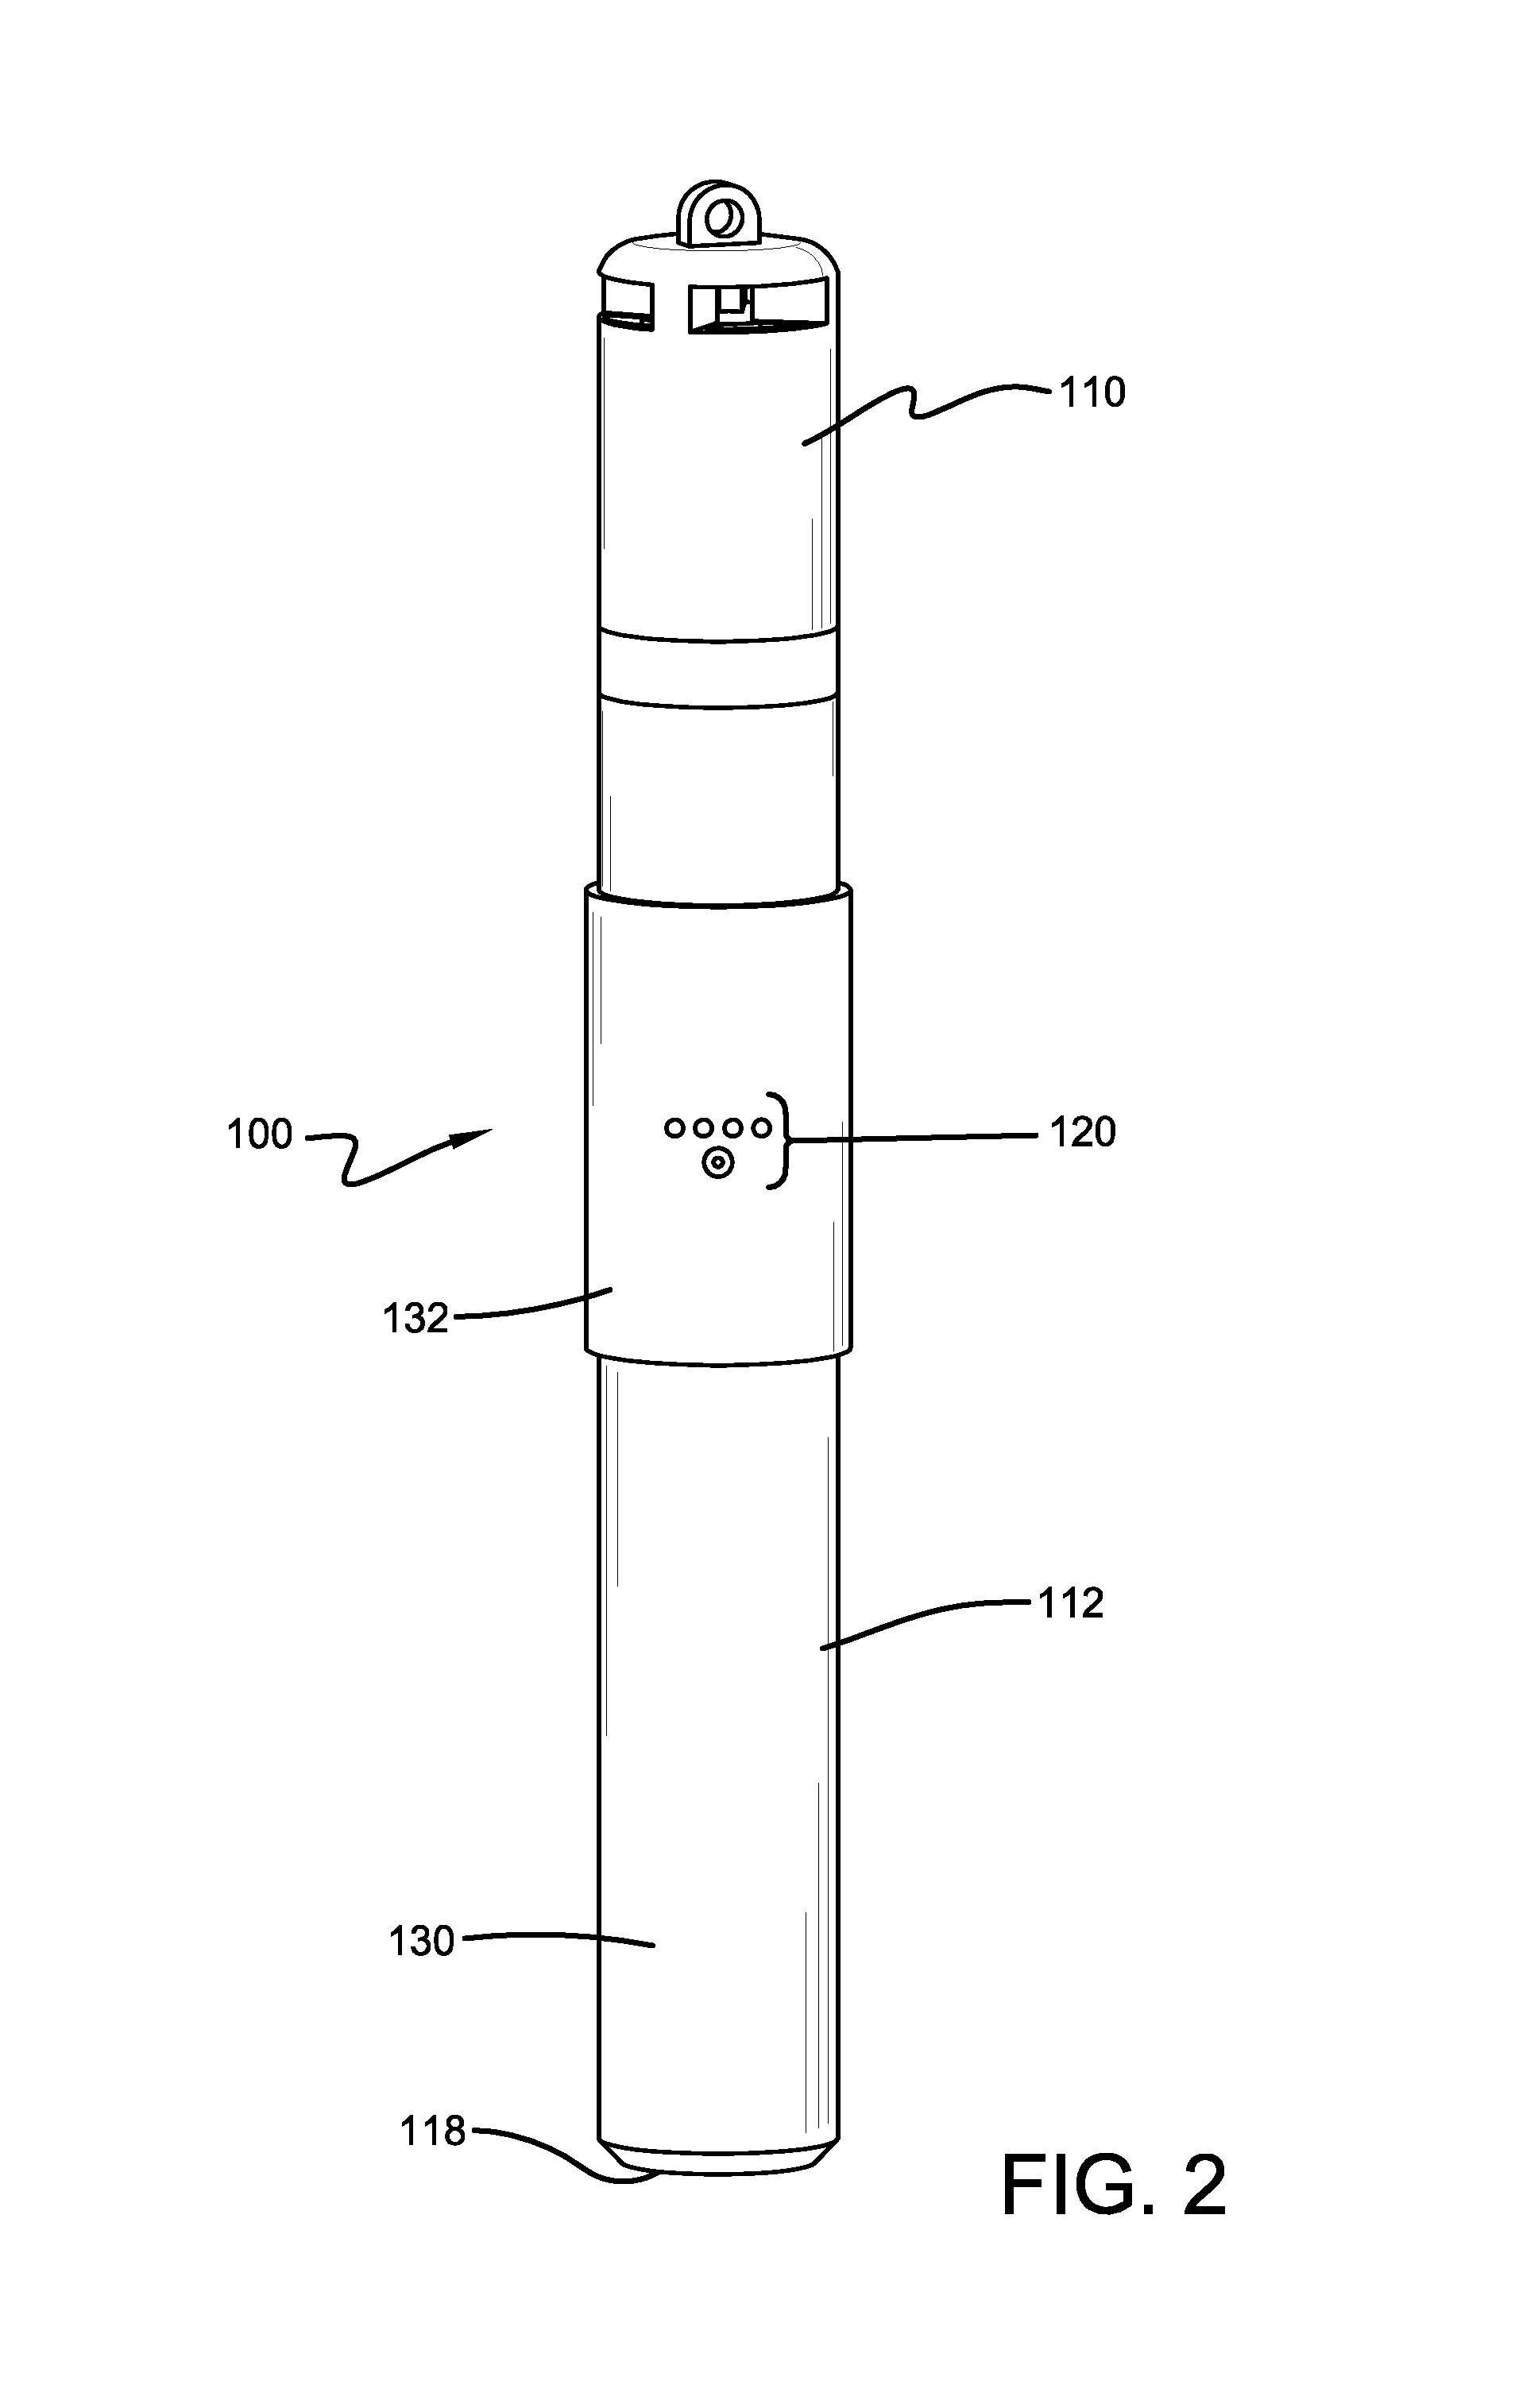 Device for creating and distributing vaporized scent